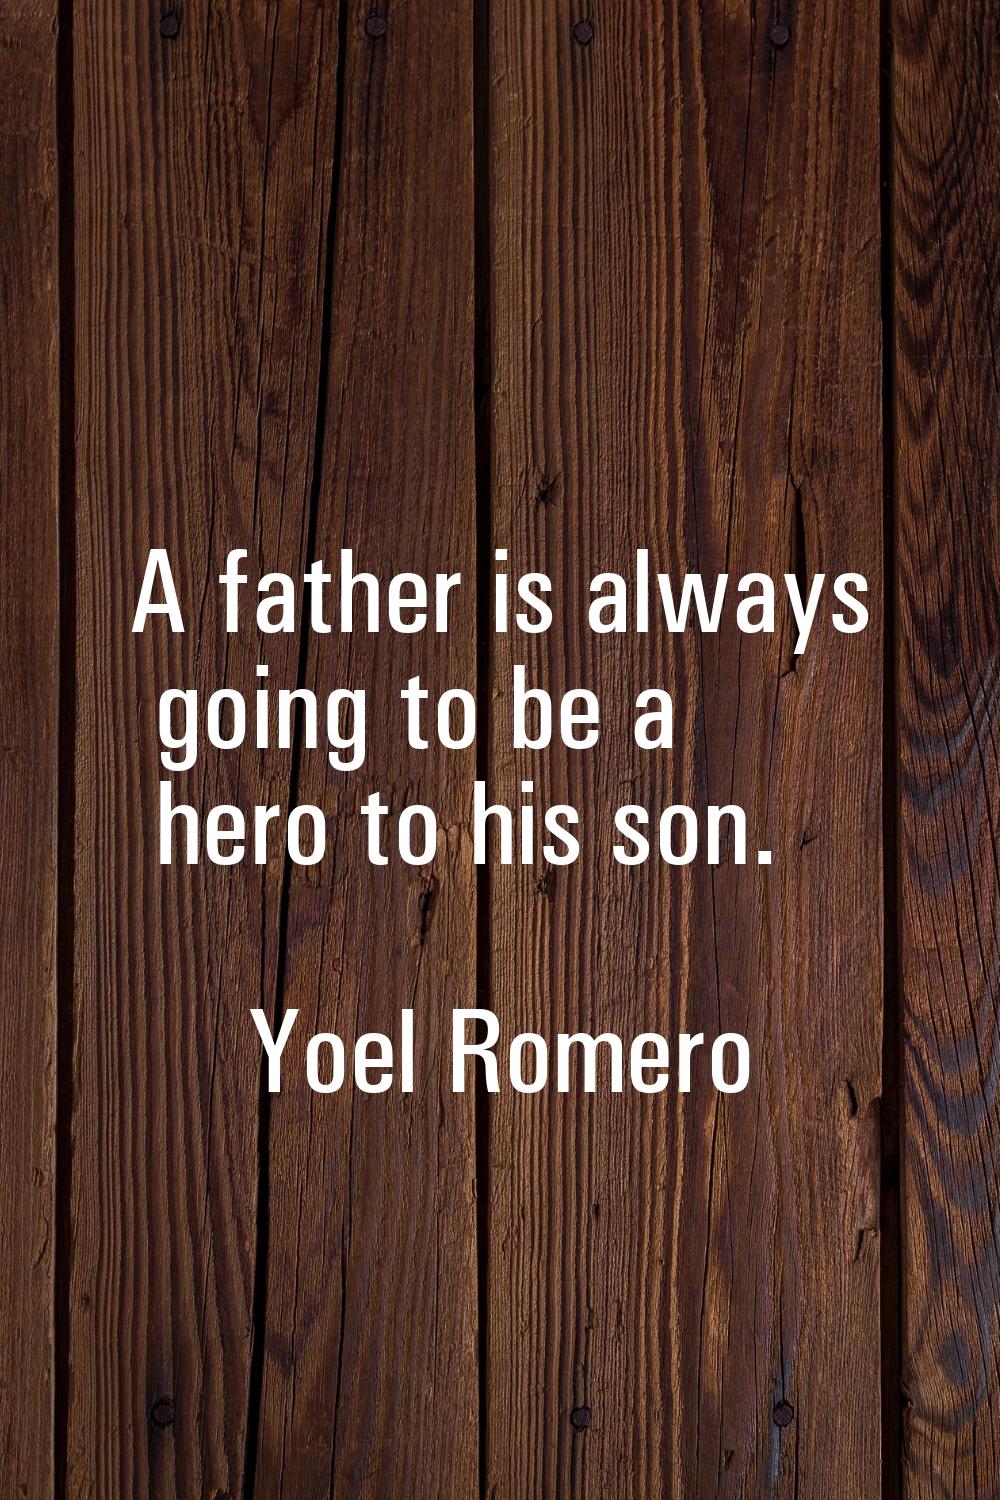 A father is always going to be a hero to his son.